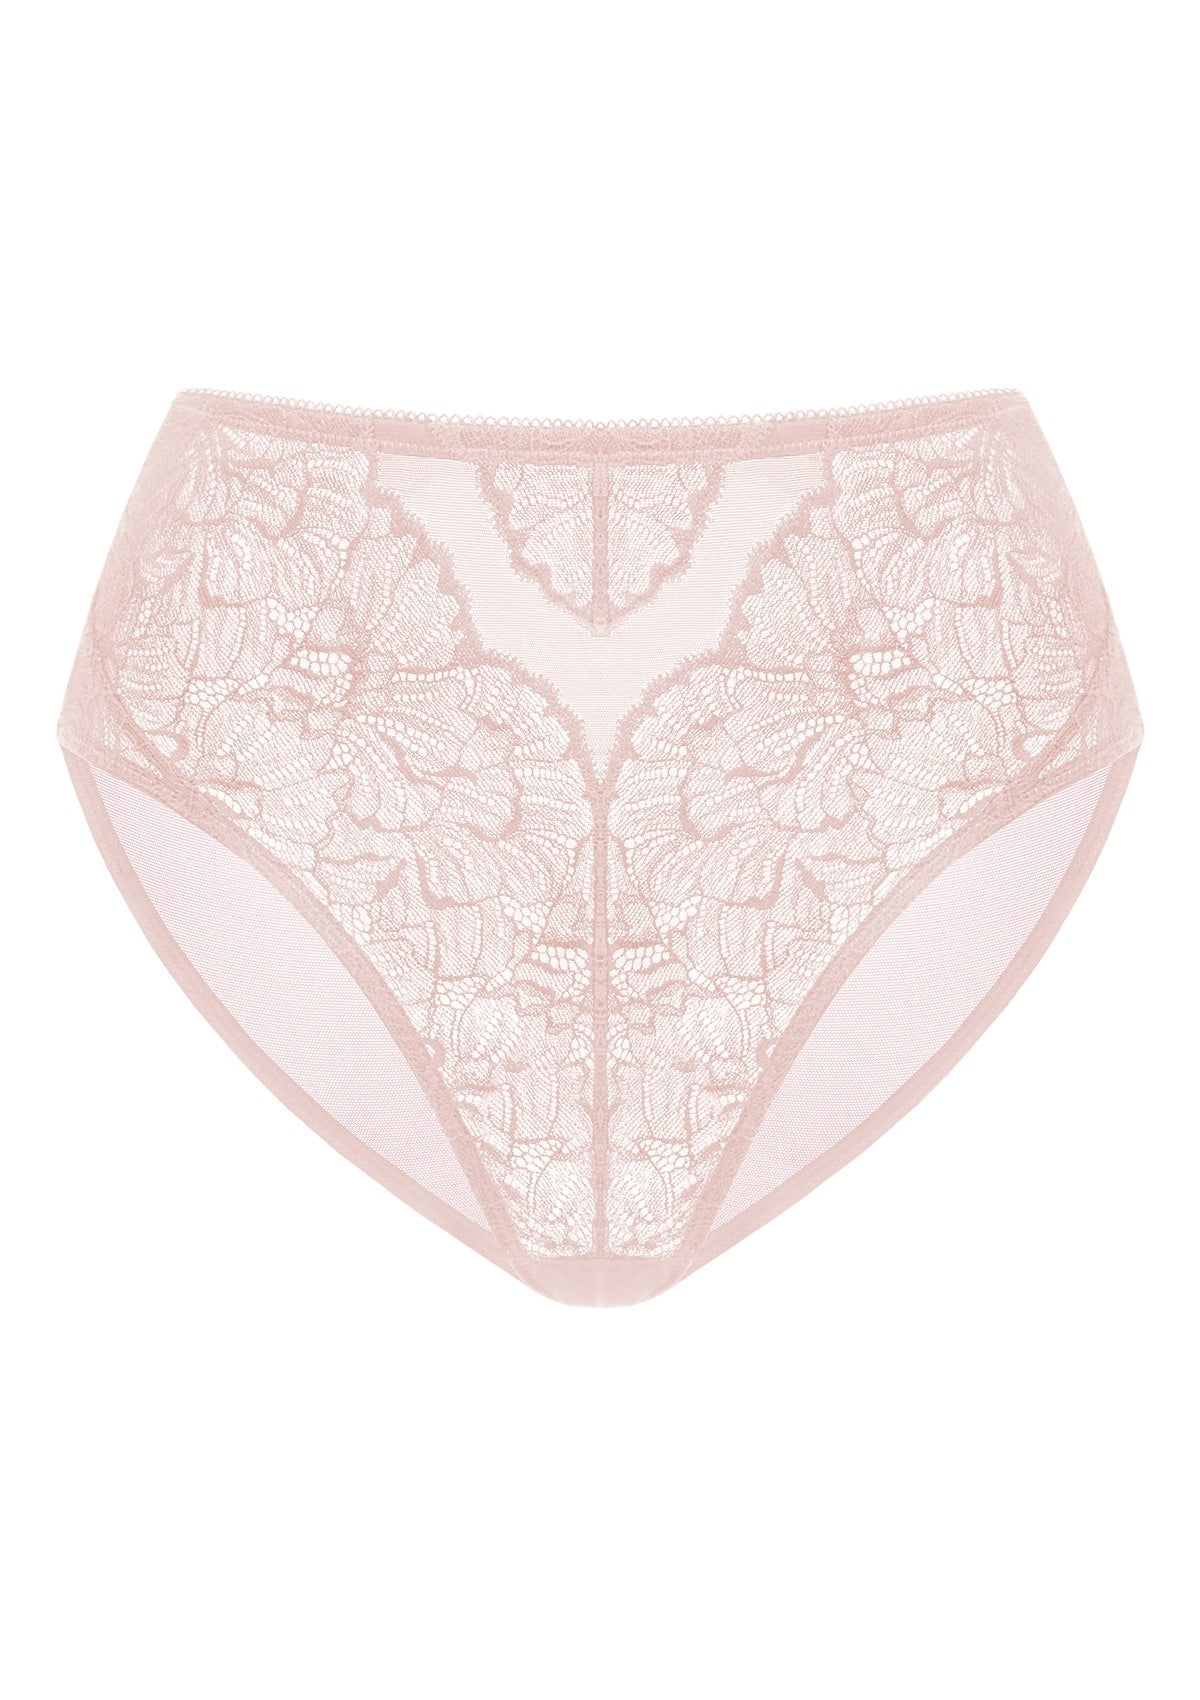 HSIA Blossom High-Rise Floral Lacy Panty-Comfort In Style - XXXL / Dark Pink